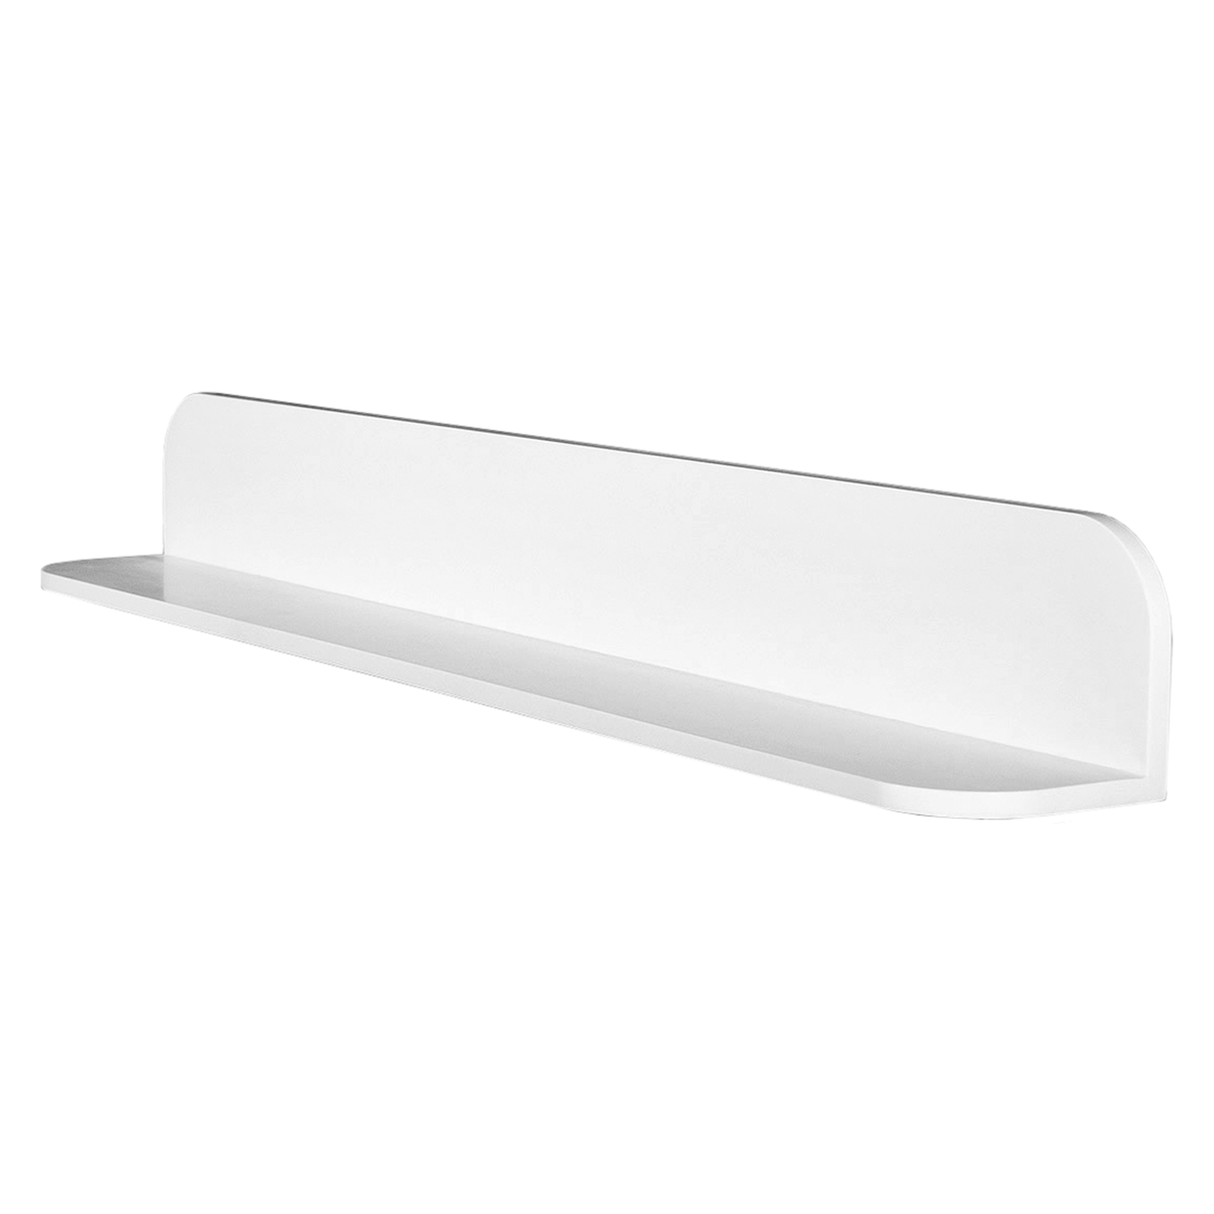 DAX Solid Surface Shelves, 35", Matte White DAX-AB-1560-35